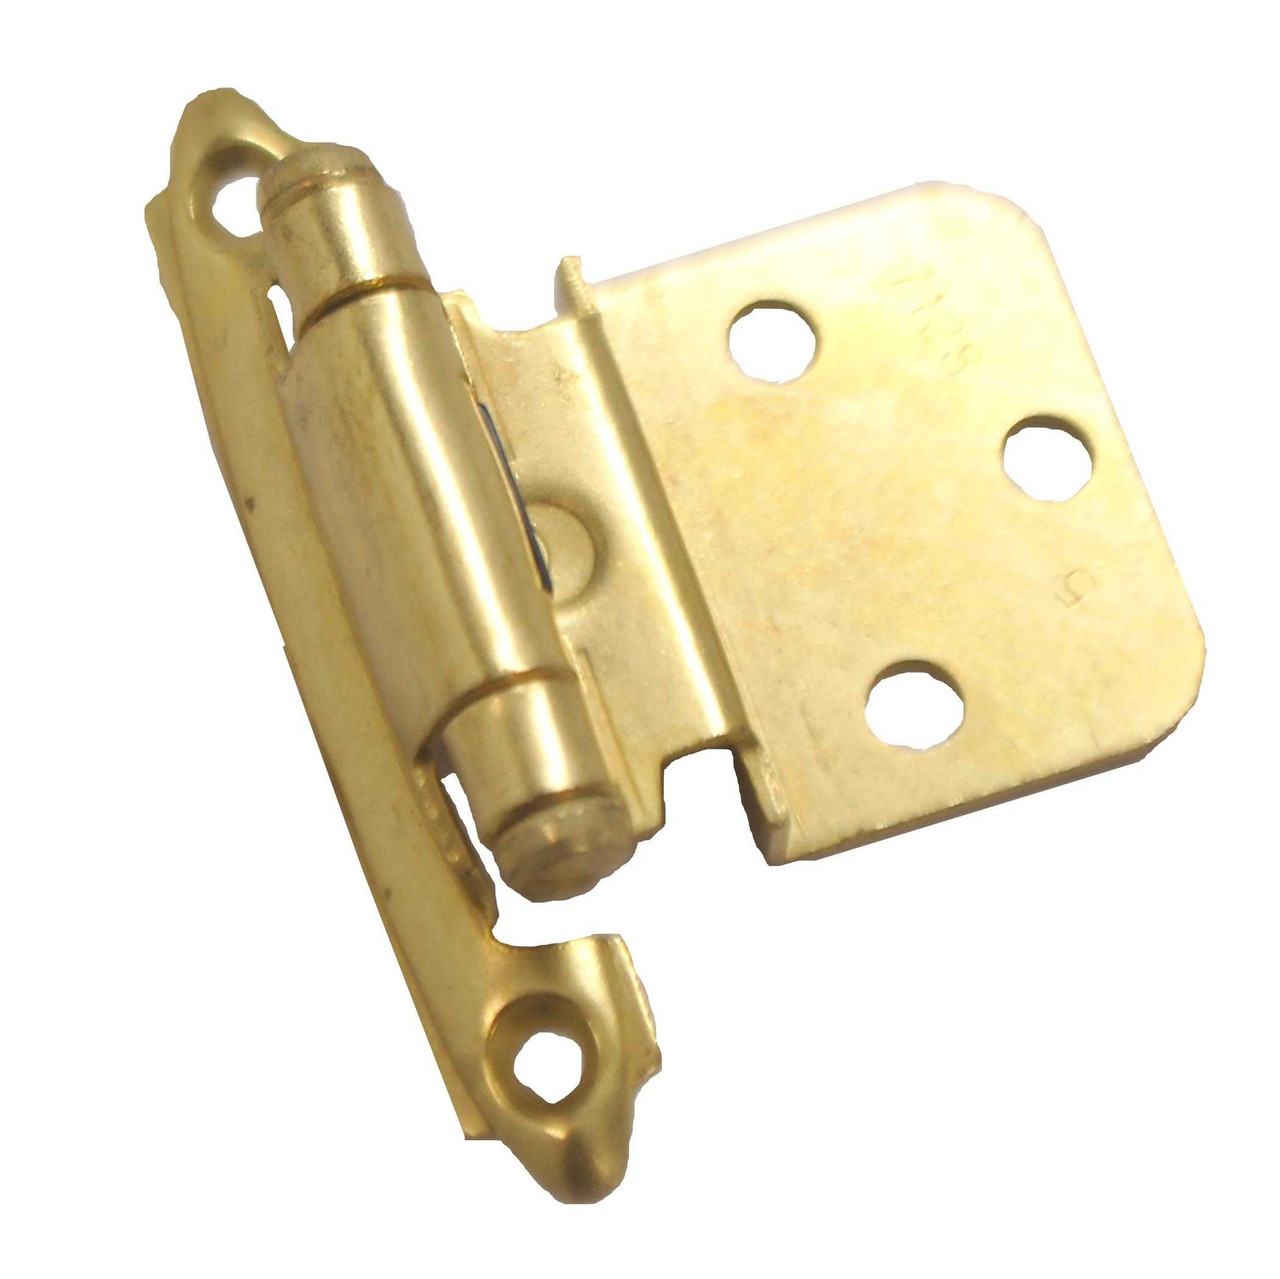 https://cdn11.bigcommerce.com/s-1xpphv/images/stencil/1280x1280/products/832/14452/AMEROCK-Self-Closing-Face-Mount-38-Inset-Cabinet-Hinges-Polished-Brass-CM7128-3-pair_5917__76694.1674494626.JPG?c=2